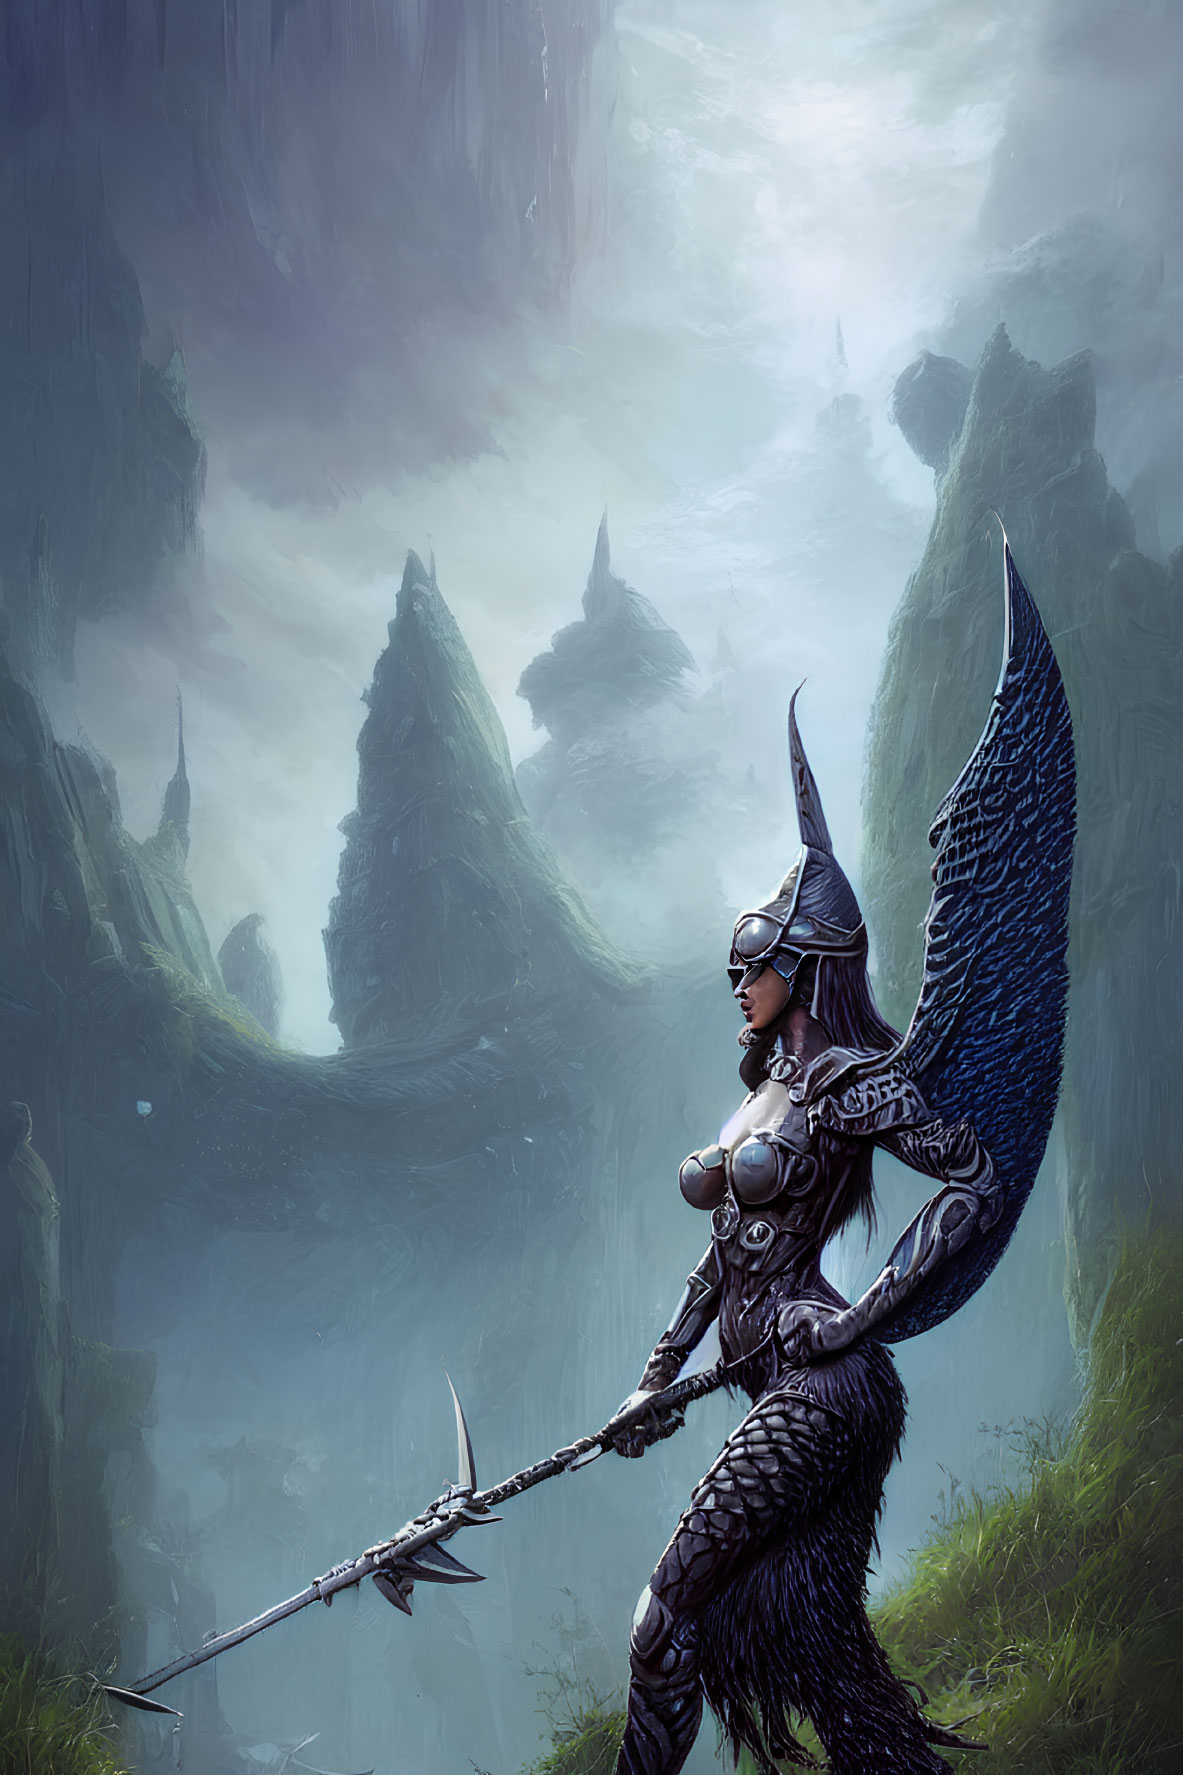 Fantasy warrior in winged helmet and spear against misty mountain backdrop